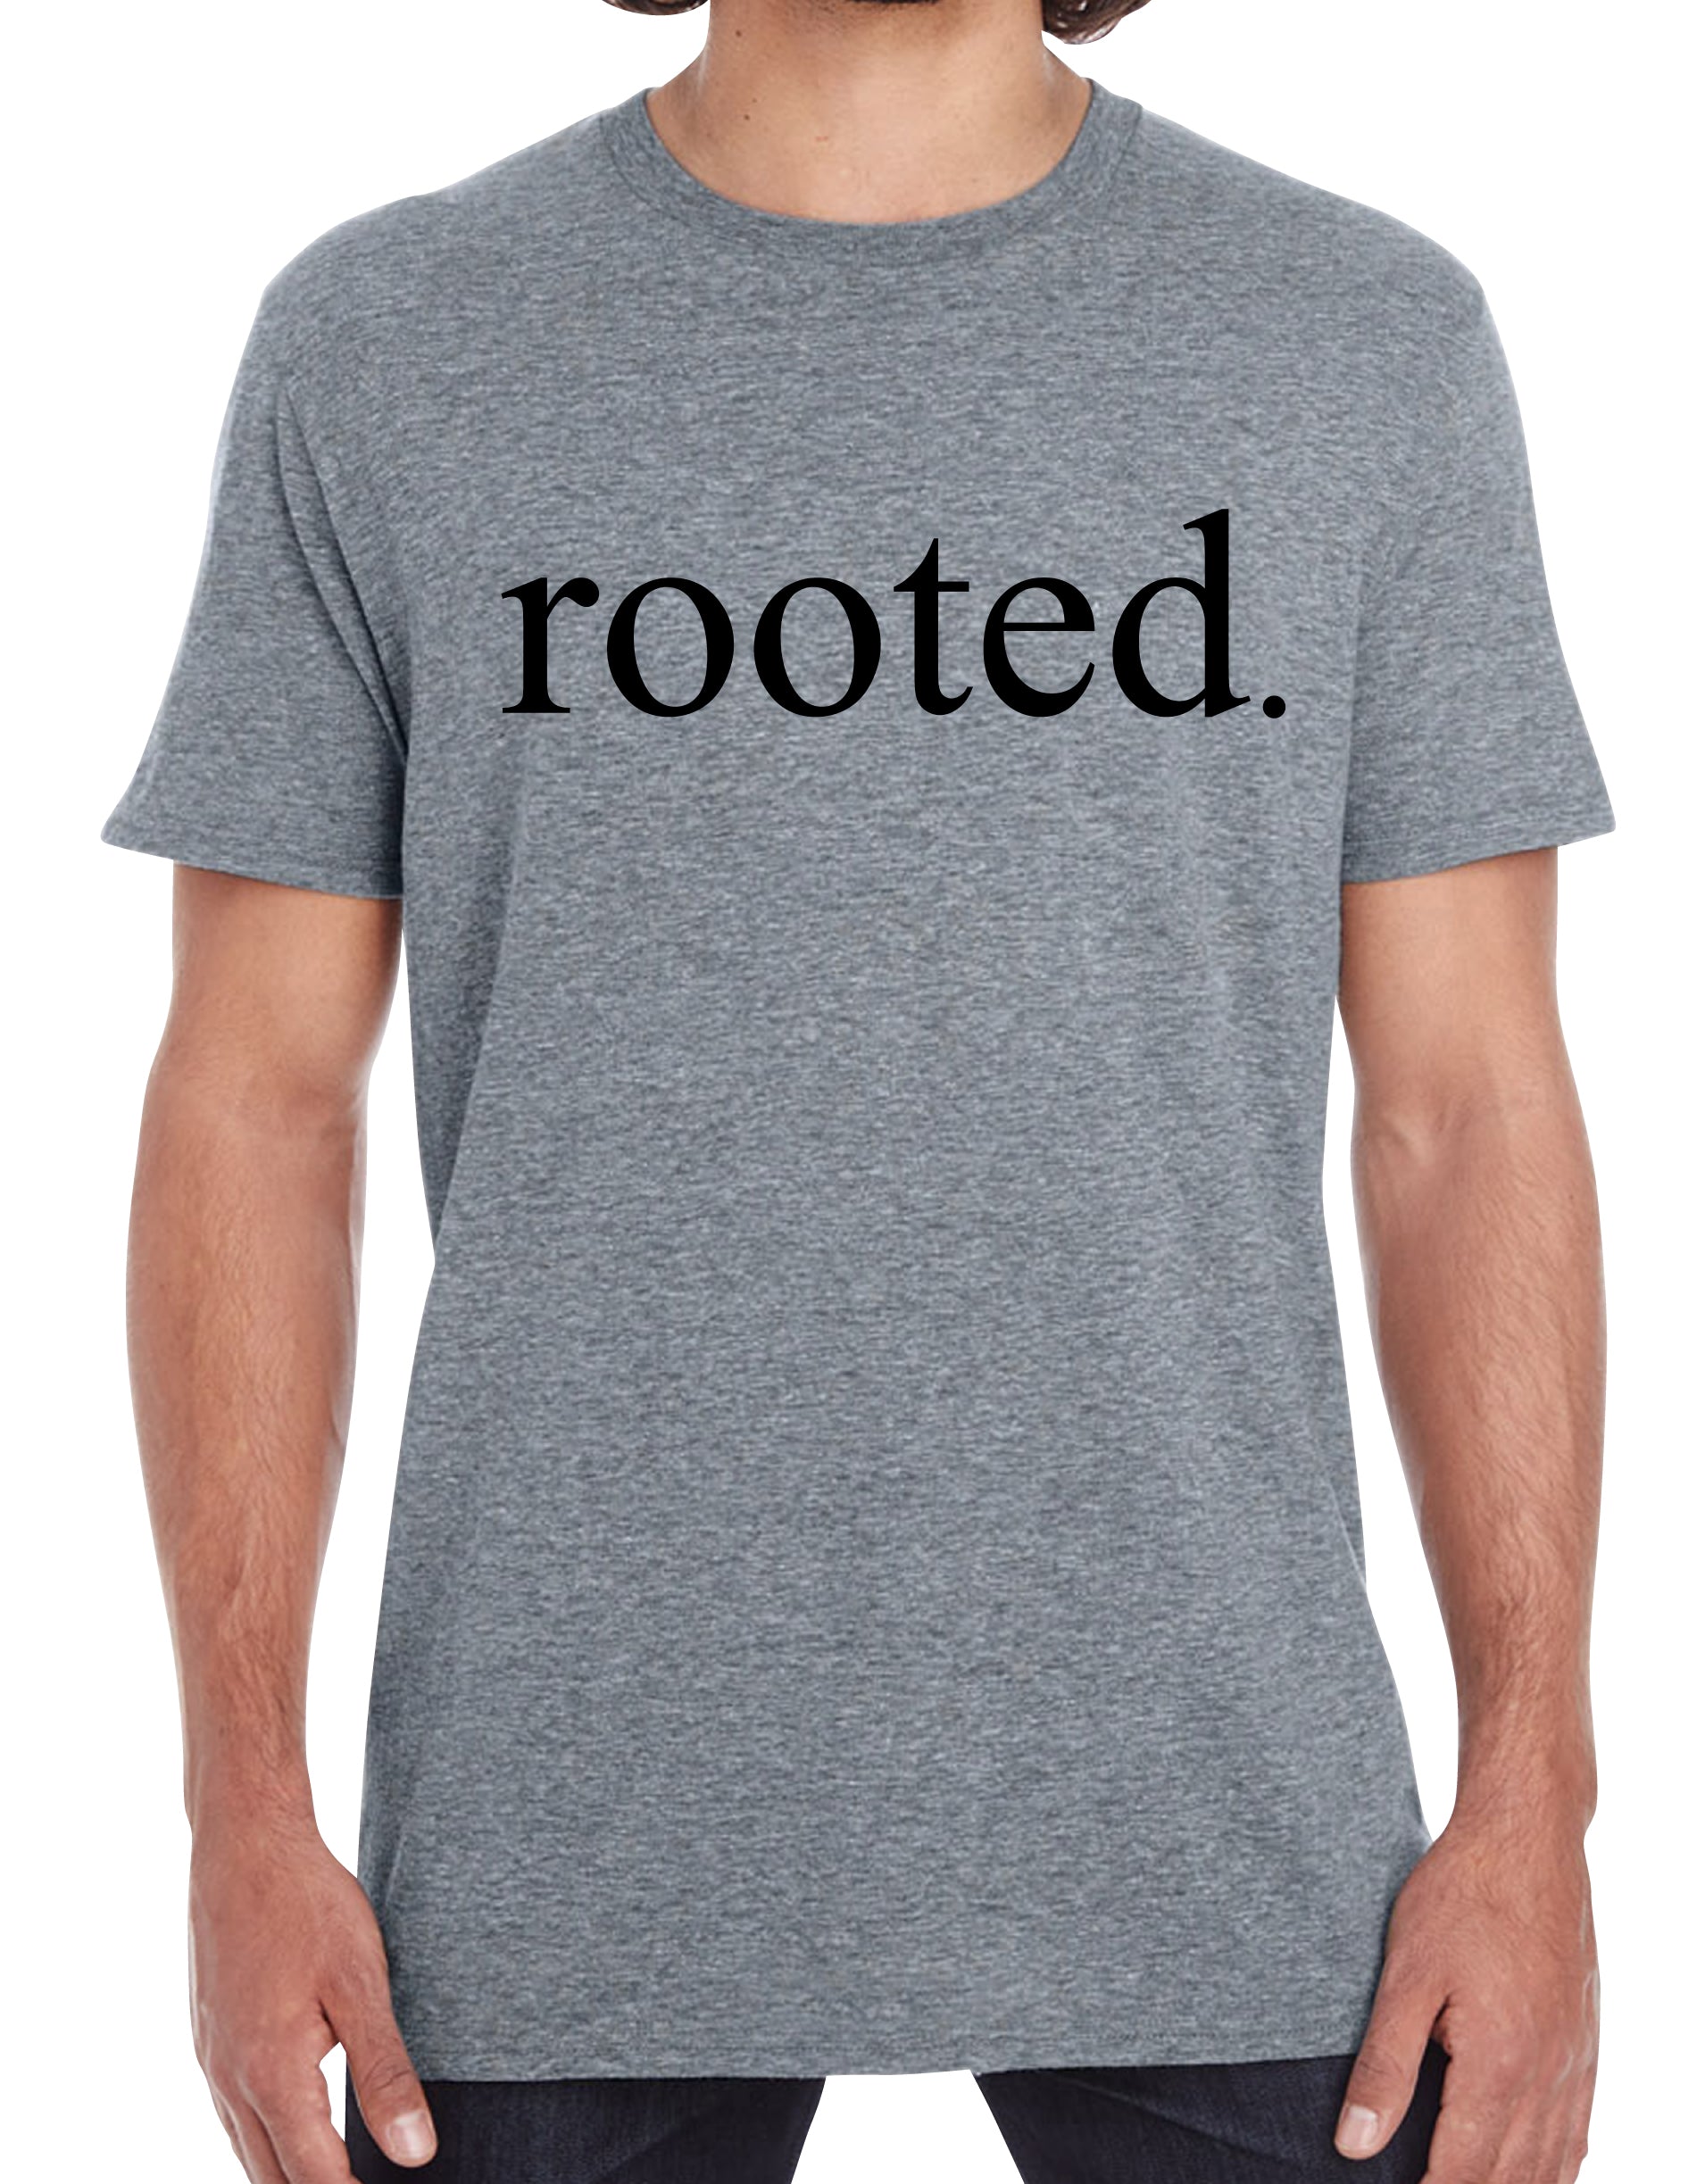 Of These Mountains Rooted Graphic Tee